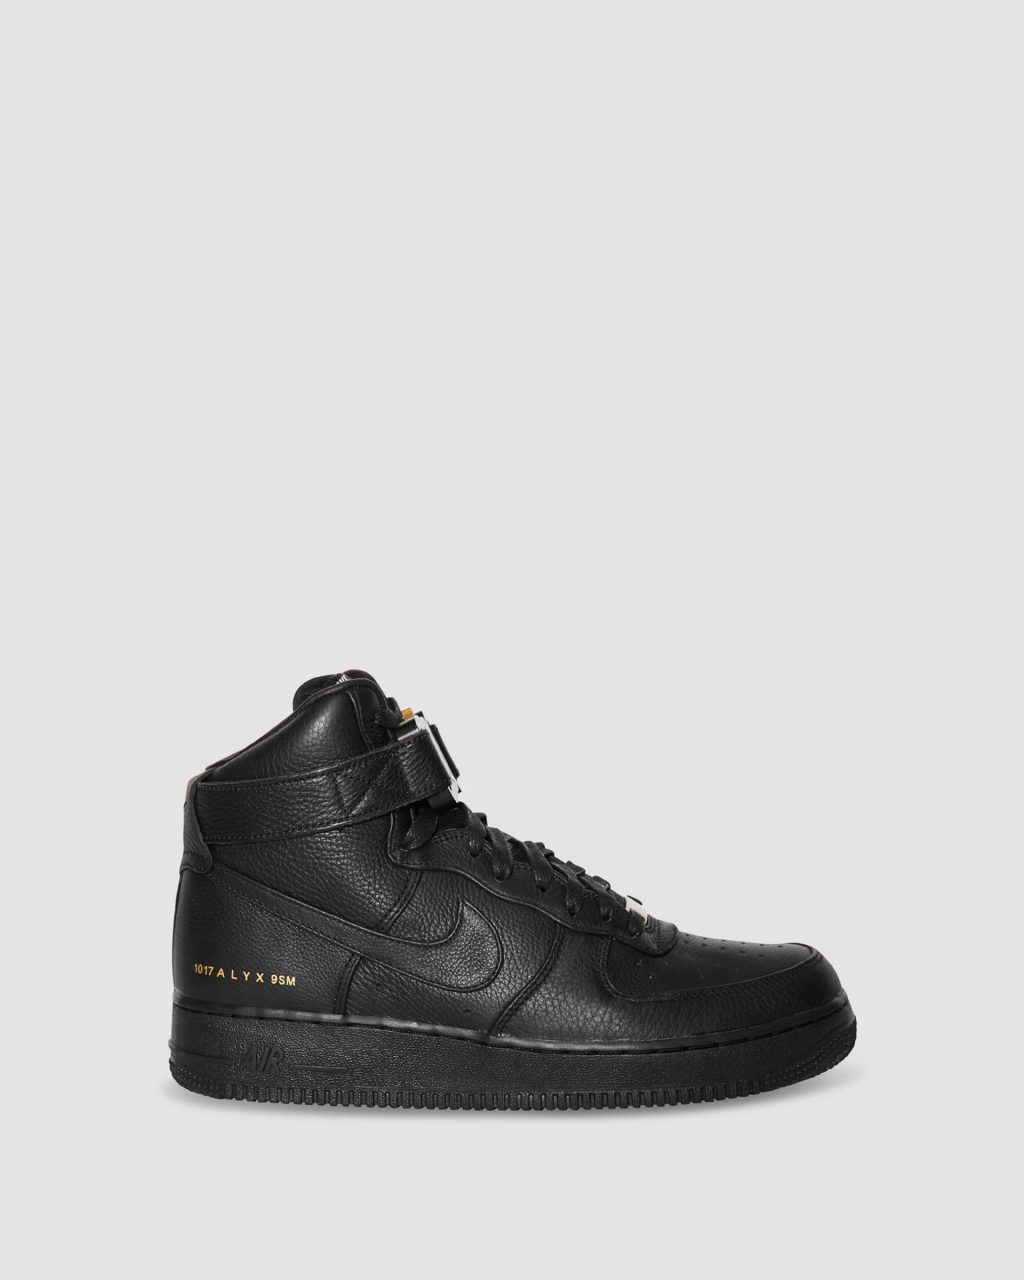 1017-alyx-9sm-nike-air-force-1-high-release-20201024